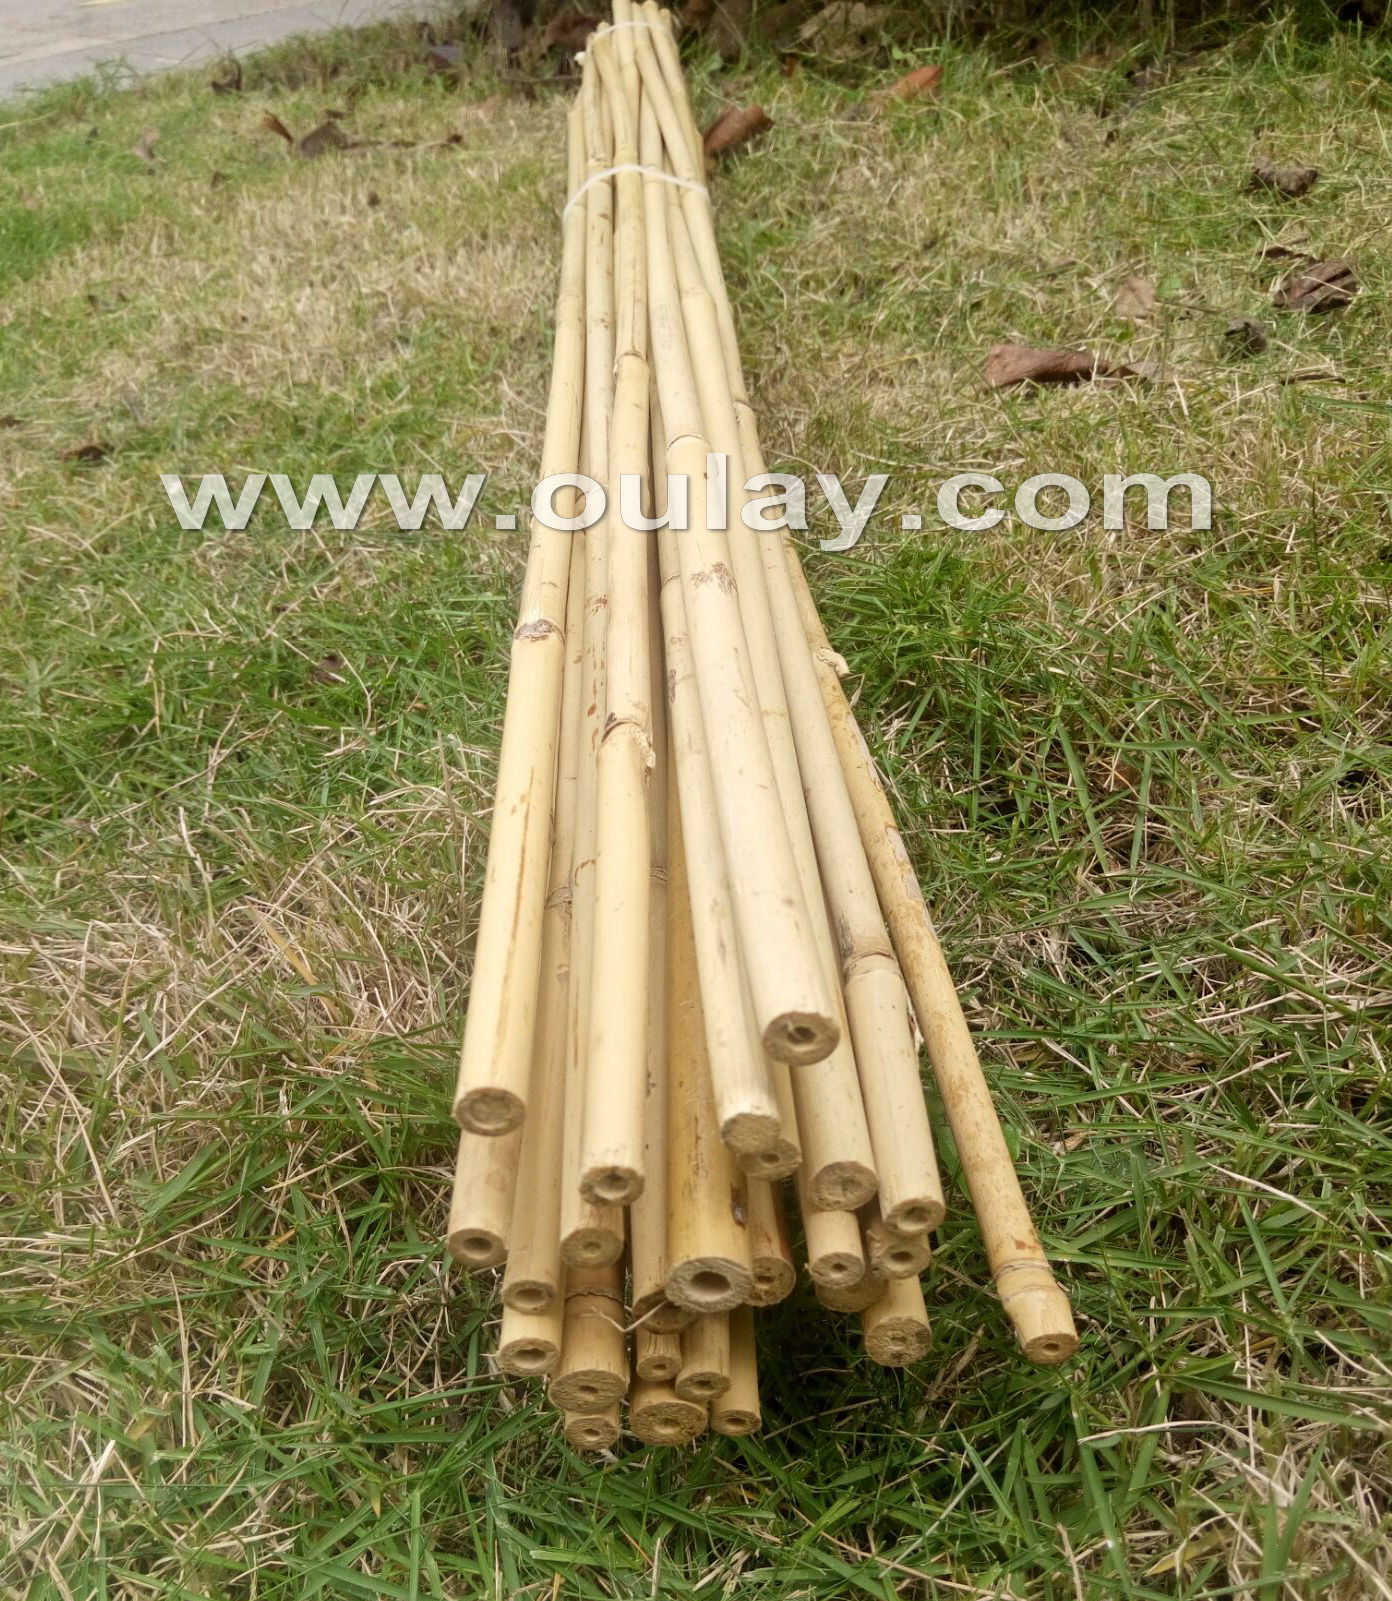 90cm bamboo poles for plants